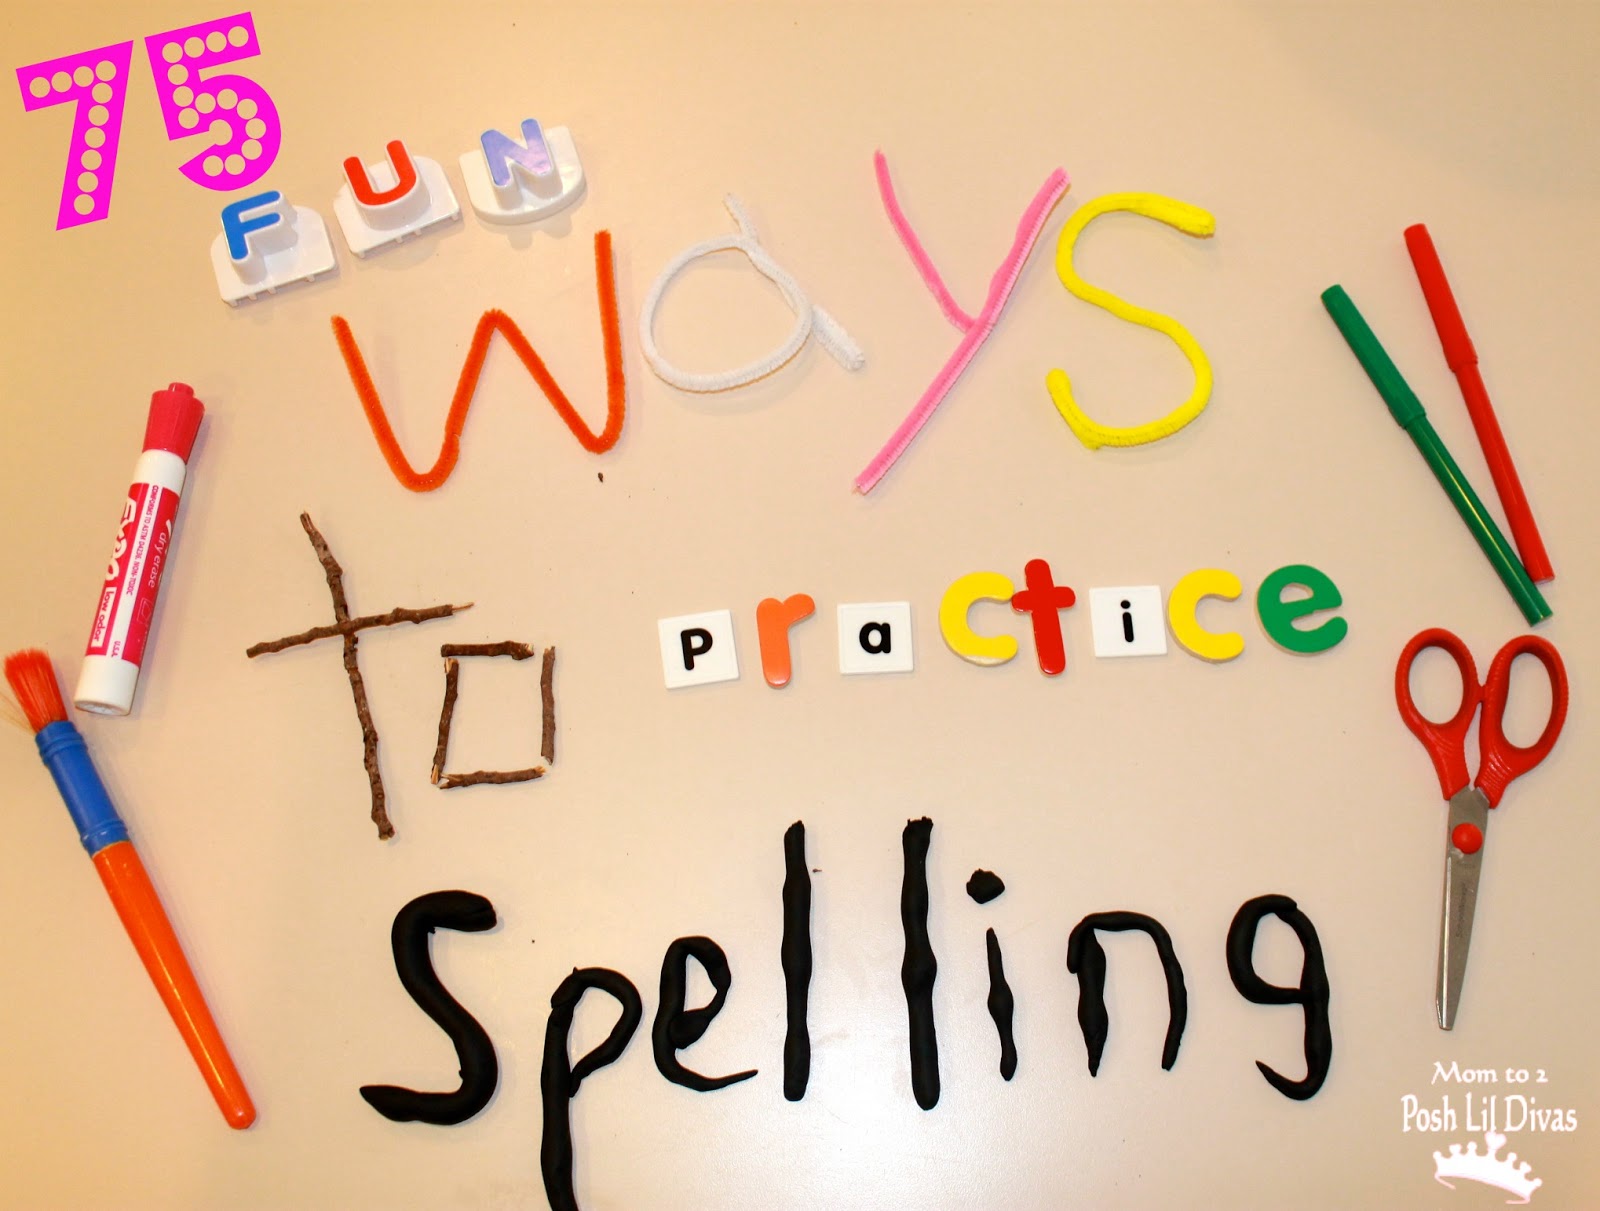 Mom to 2 Posh Lil Divas: 75 Fun Ways to Practice and Learn Spelling ...